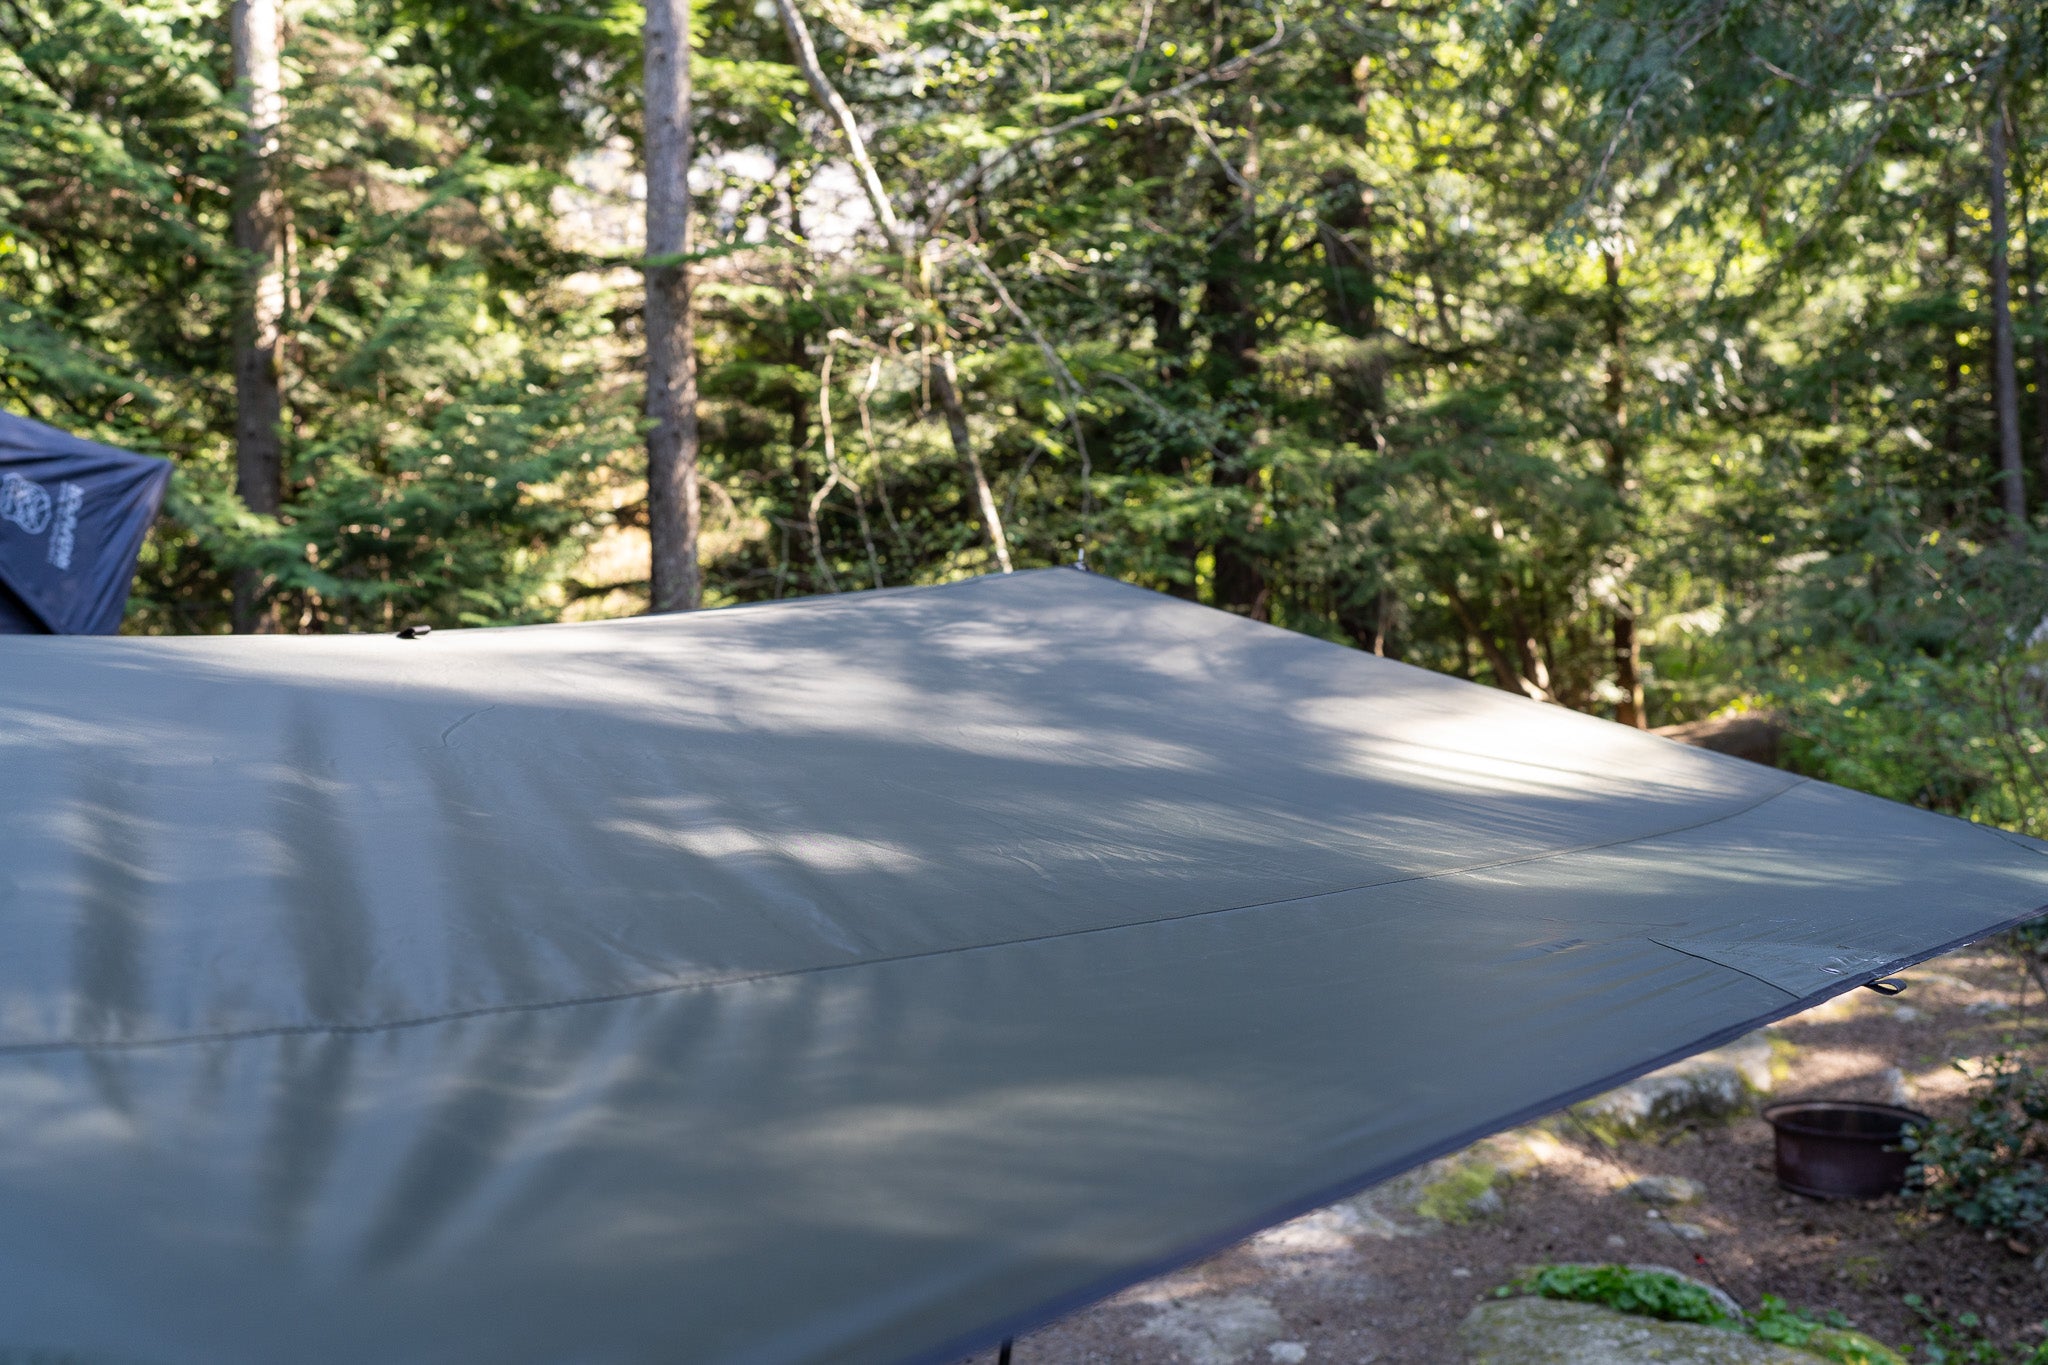 LNT Overland ES Awning Tarp material is great to block UV